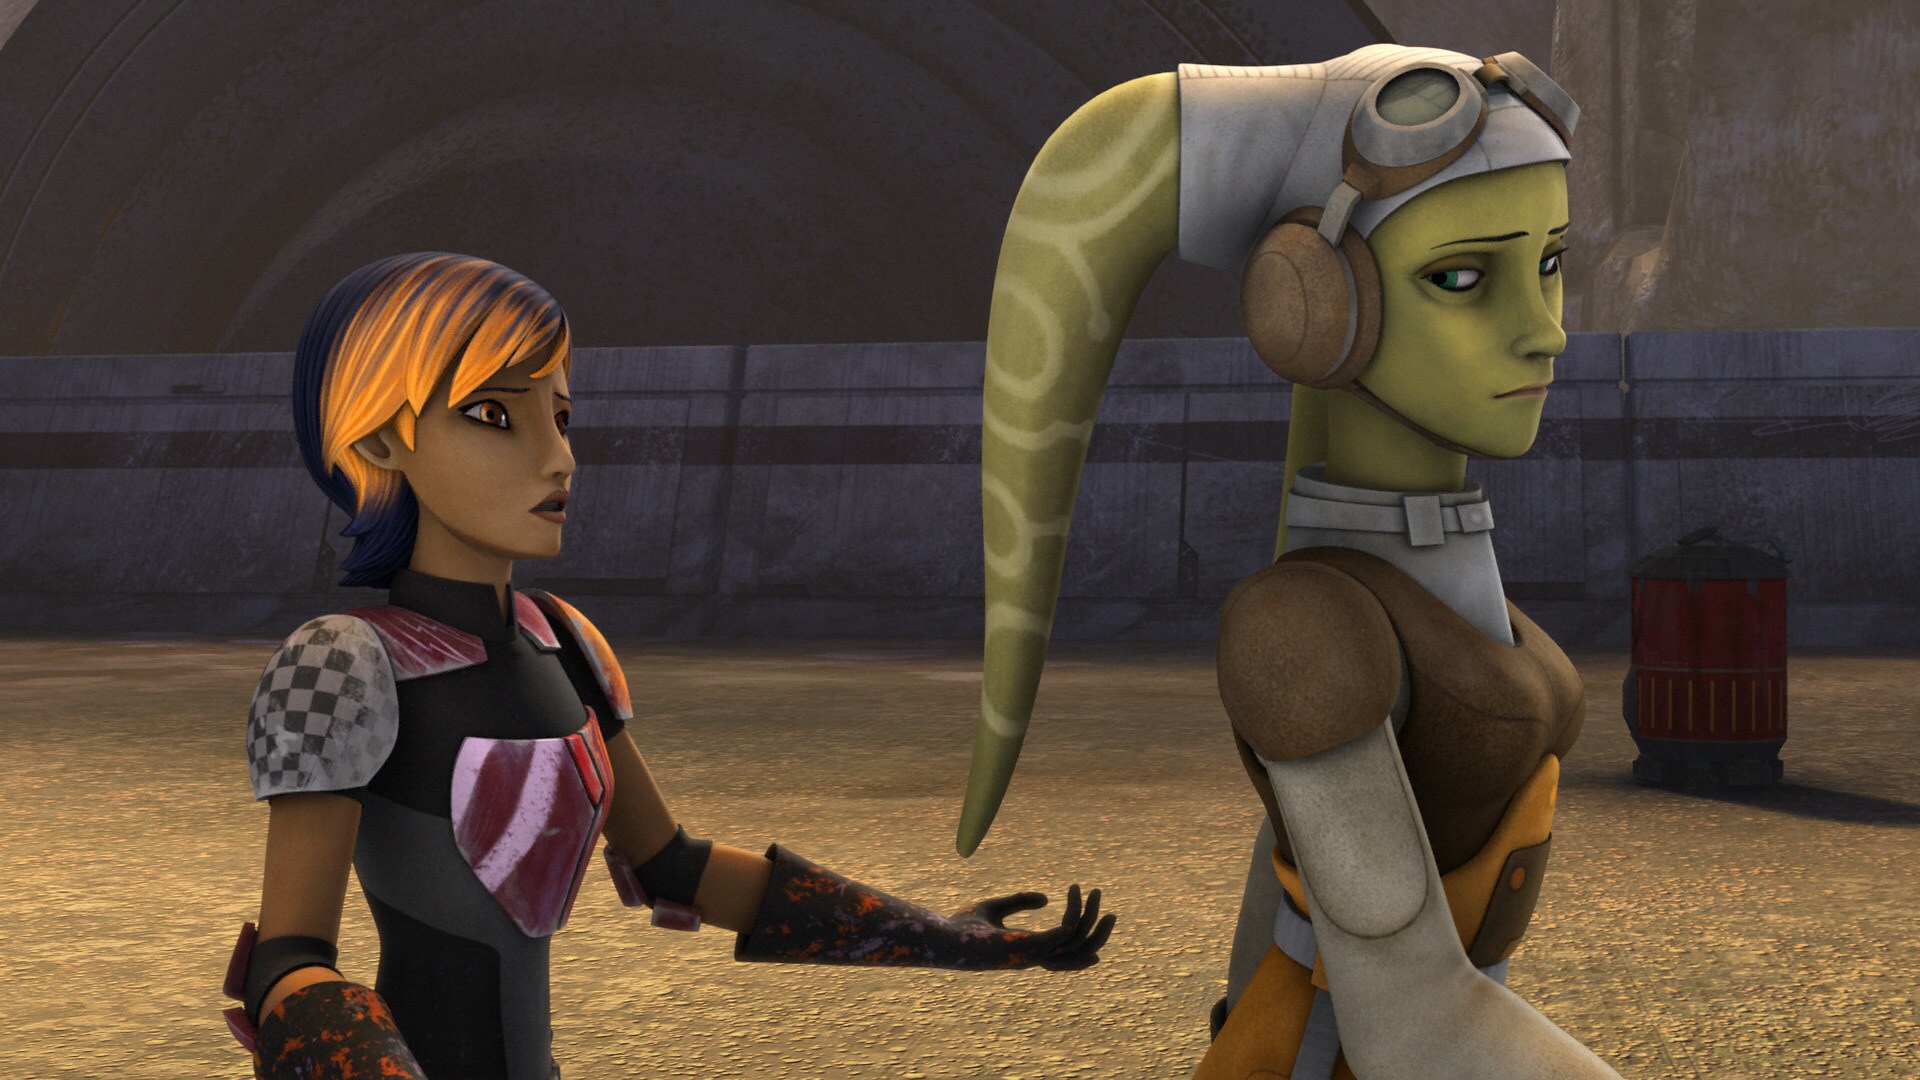 Fulcrum is a no-show, but their cargo is there. Hera and Sabine take containers back to the ship,...